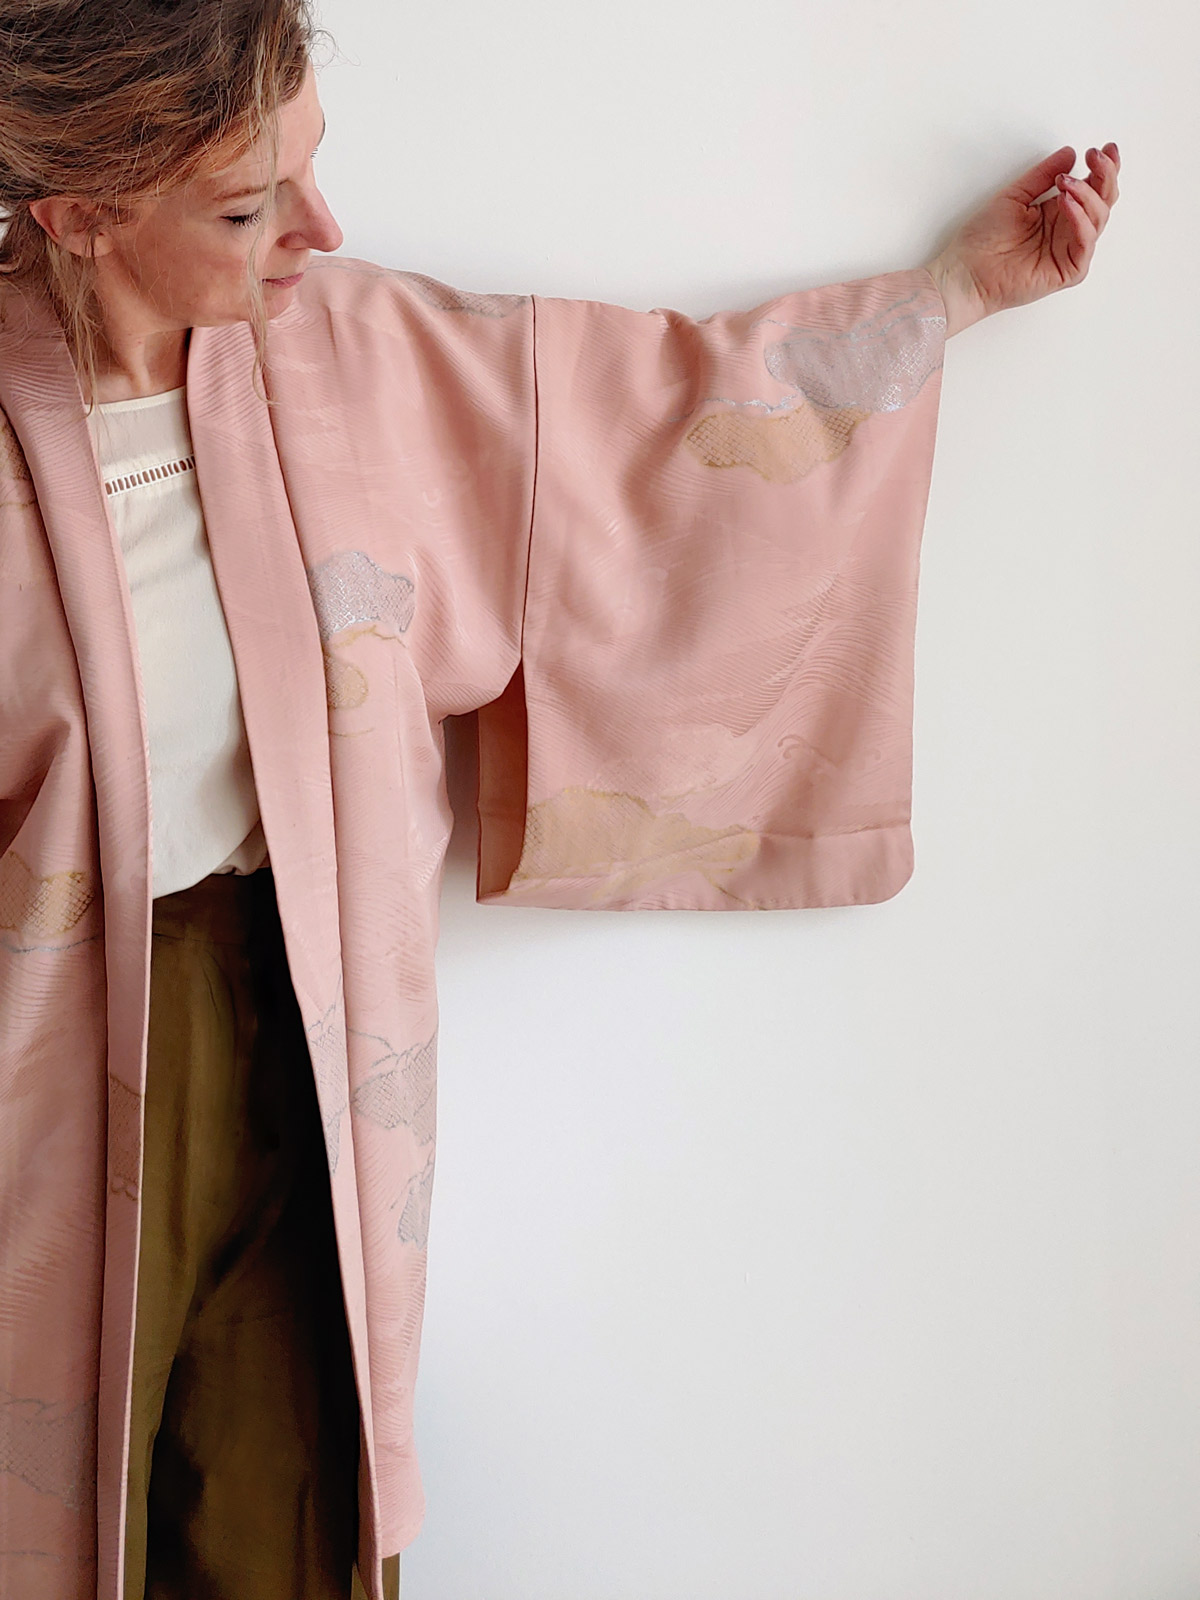 Nami – Kimono jacket in light pink with woven waves pattern